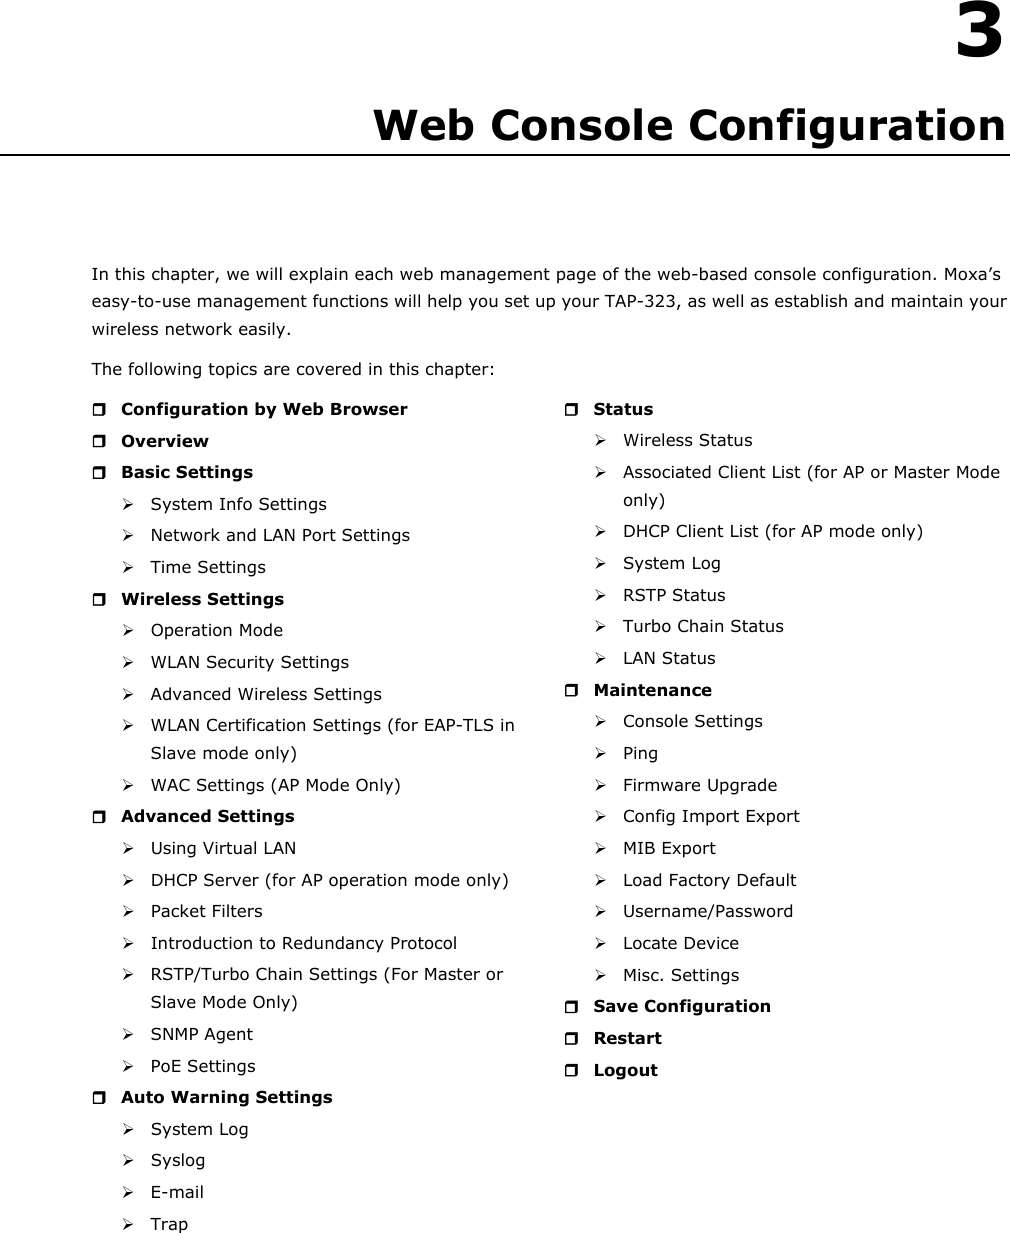   3 3. Web Console Configuration In this chapter, we will explain each web management page of the web-based console configuration. Moxa’s easy-to-use management functions will help you set up your TAP-323, as well as establish and maintain your wireless network easily. The following topics are covered in this chapter:  Configuration by Web Browser  Overview  Basic Settings  System Info Settings  Network and LAN Port Settings  Time Settings  Wireless Settings  Operation Mode  WLAN Security Settings  Advanced Wireless Settings  WLAN Certification Settings (for EAP-TLS in Slave mode only)  WAC Settings (AP Mode Only)  Advanced Settings  Using Virtual LAN  DHCP Server (for AP operation mode only)  Packet Filters  Introduction to Redundancy Protocol  RSTP/Turbo Chain Settings (For Master or Slave Mode Only)  SNMP Agent  PoE Settings  Auto Warning Settings  System Log  Syslog   E-mail   Trap   Status  Wireless Status  Associated Client List (for AP or Master Mode only)  DHCP Client List (for AP mode only)  System Log   RSTP Status  Turbo Chain Status  LAN Status  Maintenance  Console Settings  Ping  Firmware Upgrade  Config Import Export  MIB Export  Load Factory Default  Username/Password  Locate Device  Misc. Settings  Save Configuration  Restart  Logout          